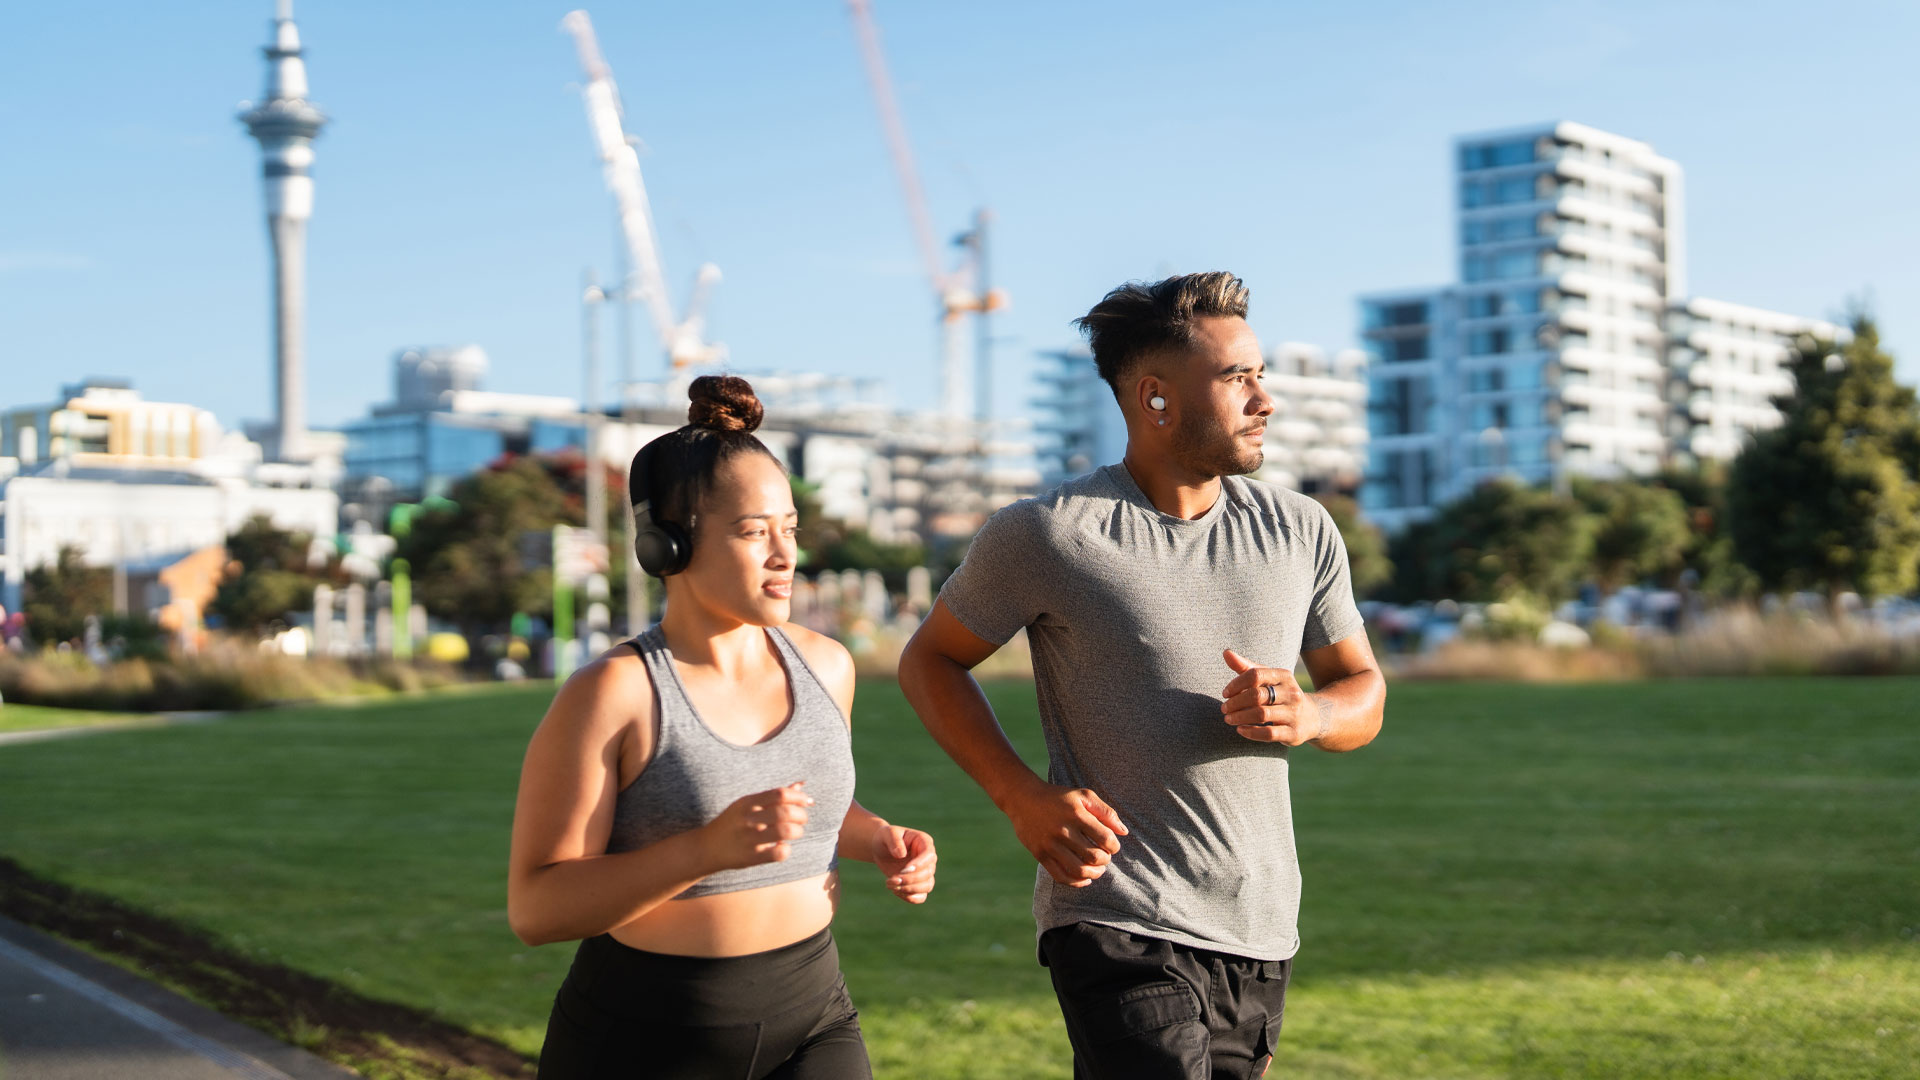 Friends out jogging on a nice day in Auckland, New Zealand.